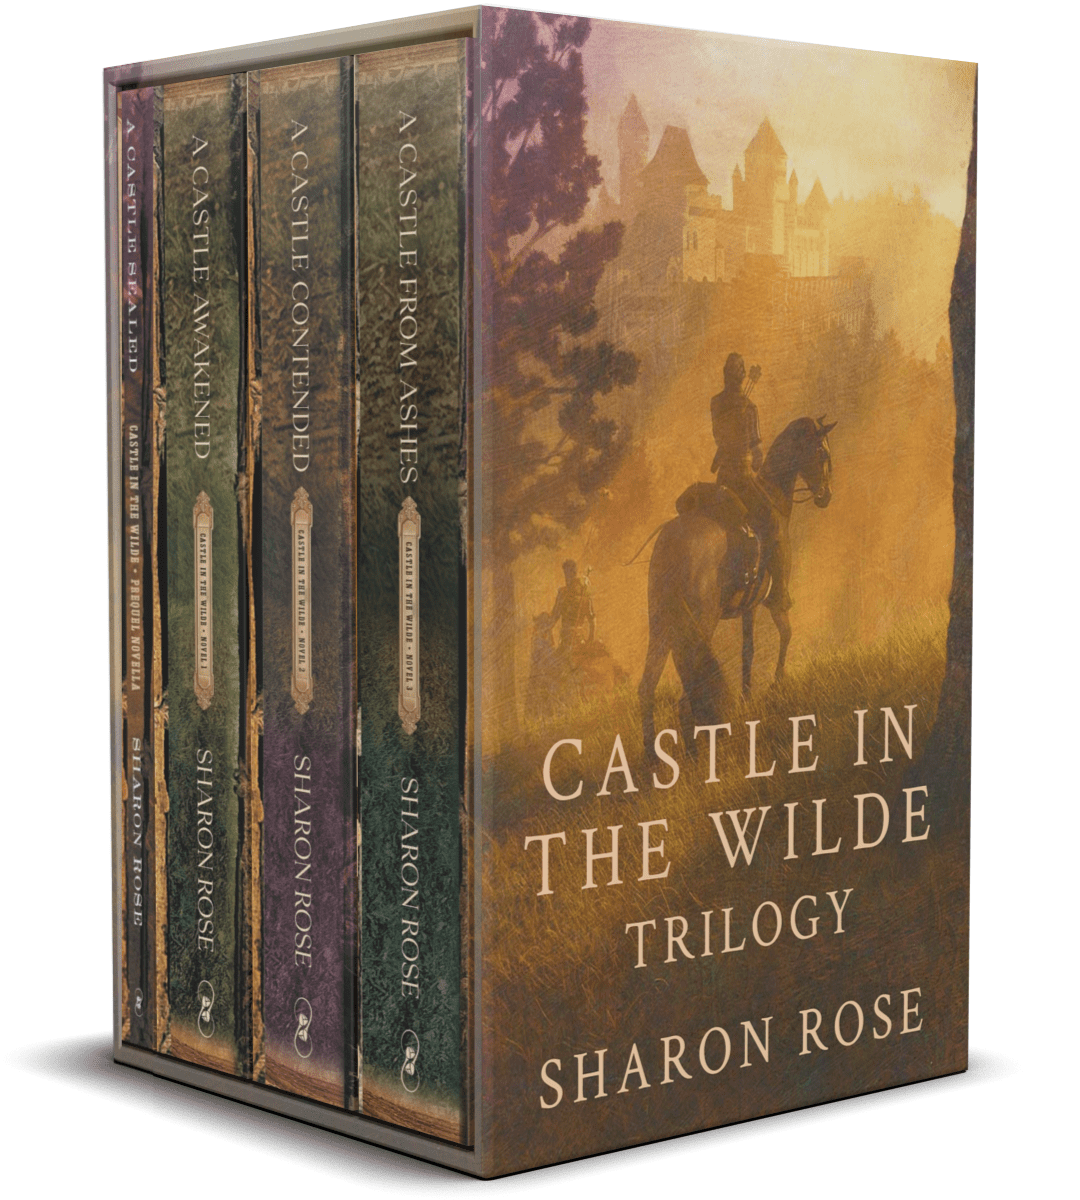 A Castle From Ashes by Sharon Rose